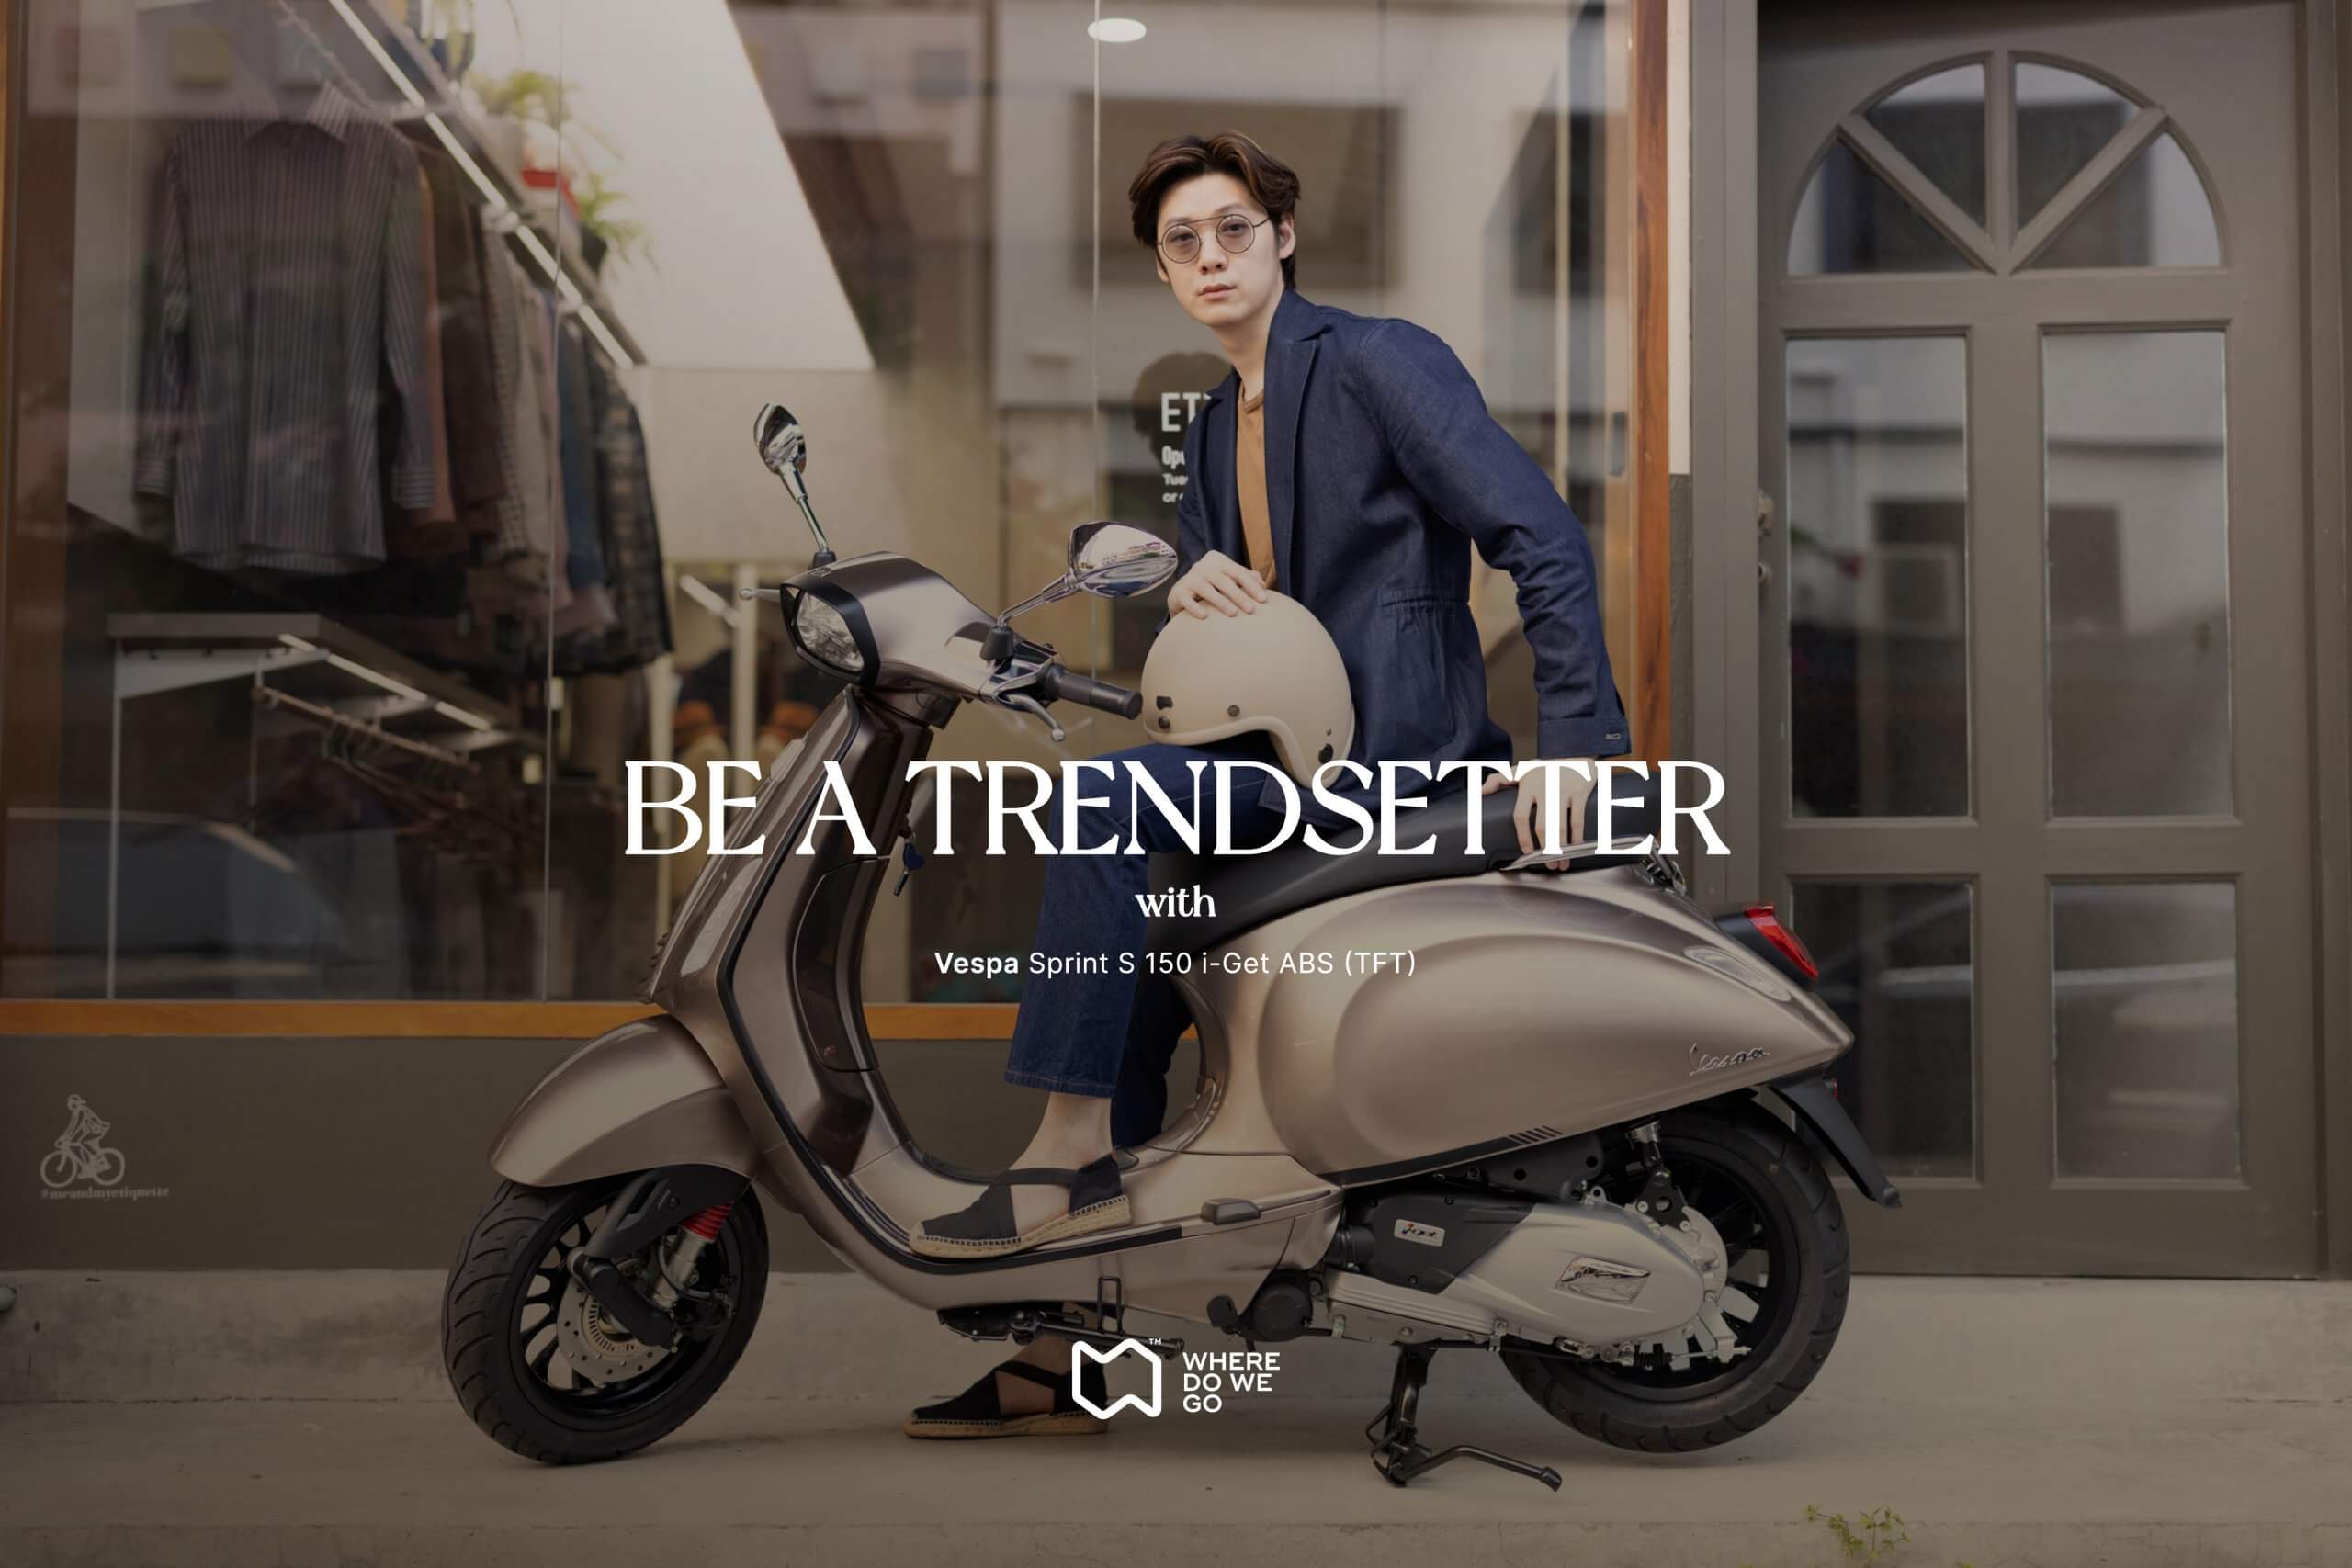 ‘Be a Trendsetter’ with Vespa Sprint S 150 i-Get ABS (TFT)